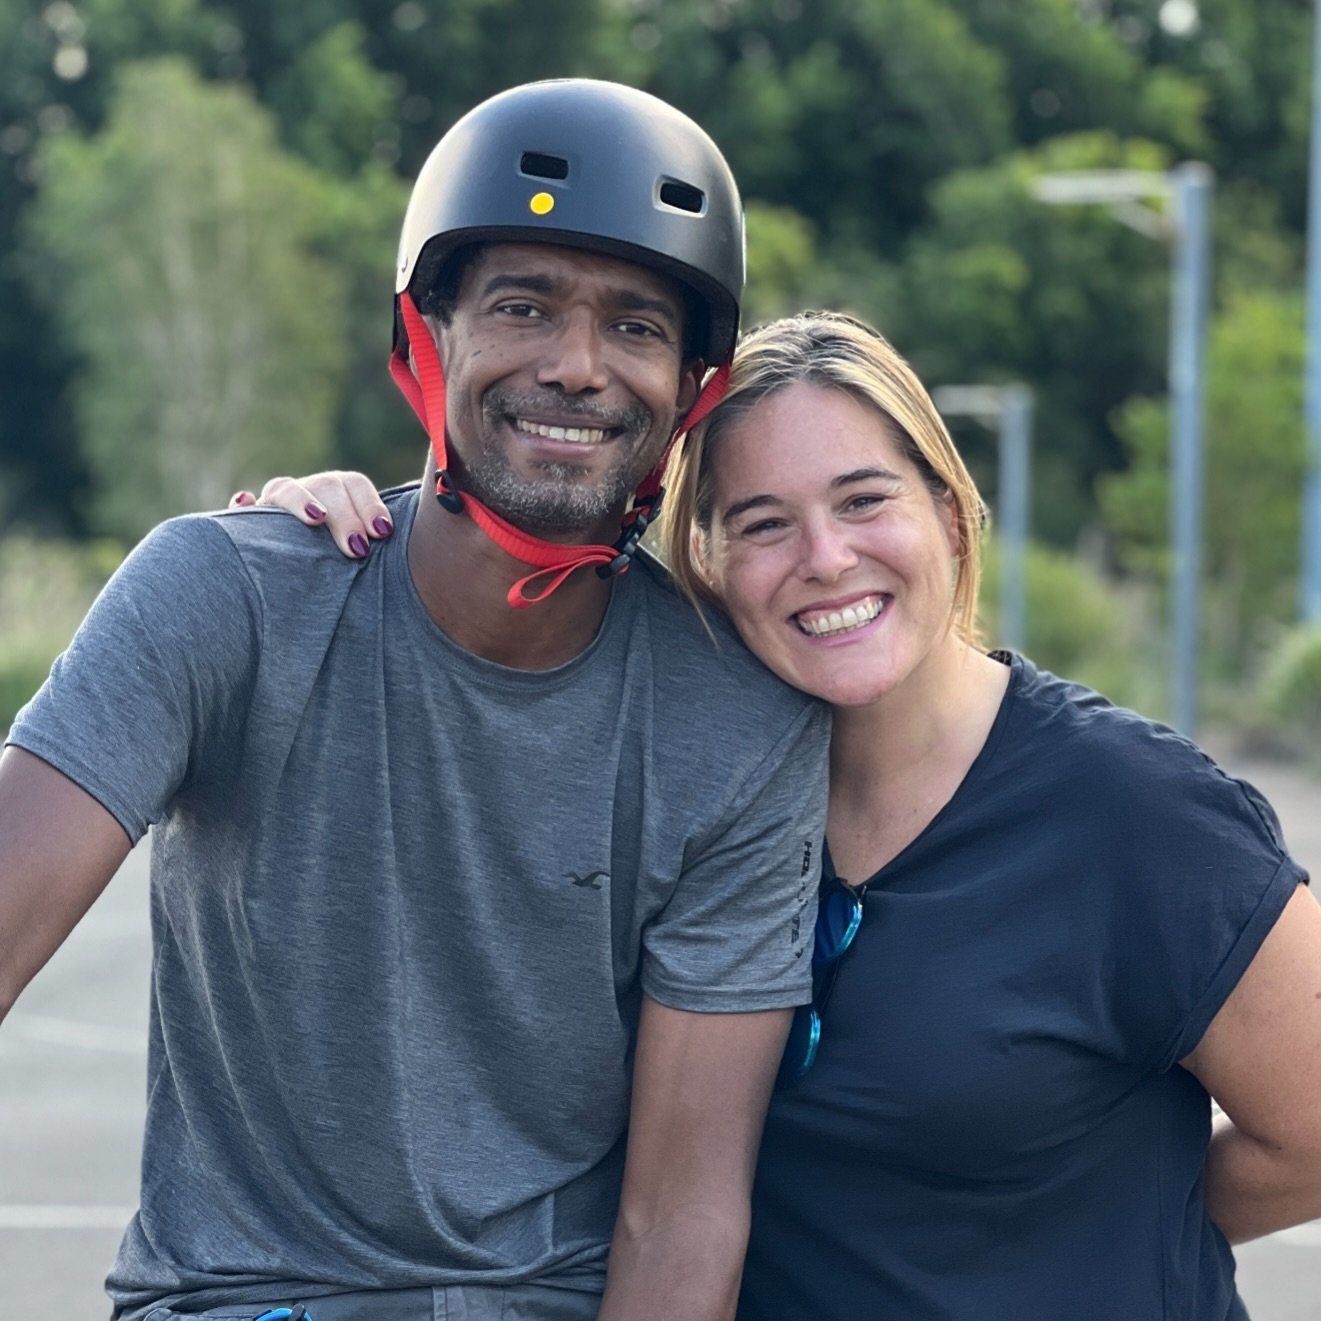 The world&rsquo;s newest bike rider &hellip;.. and a fabulous birthday &hellip;. gifting a learn to ride one on one private lesson &hellip;. The sustainable gift that won&rsquo;t end up in landfill. #pedalsetgo